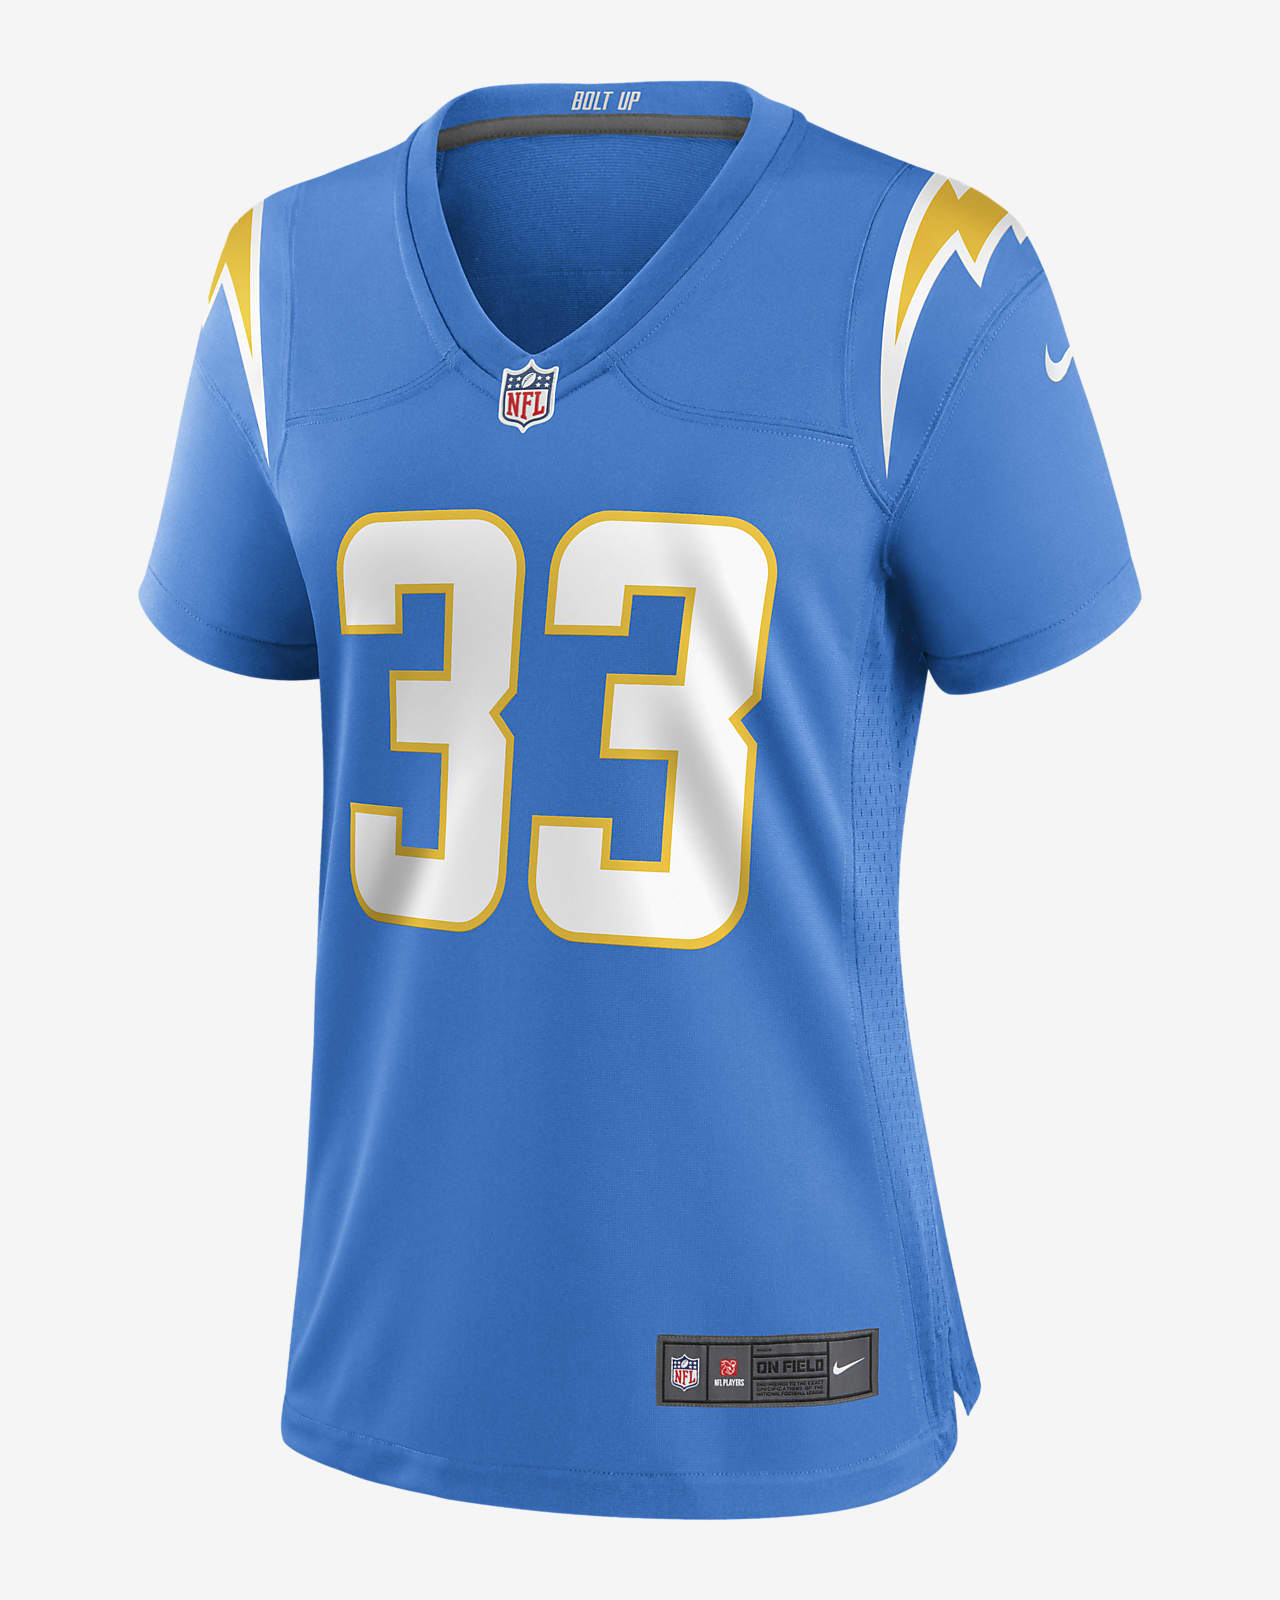 NFL Los Angeles Chargers (Derwin James) Women's Game Football Jersey